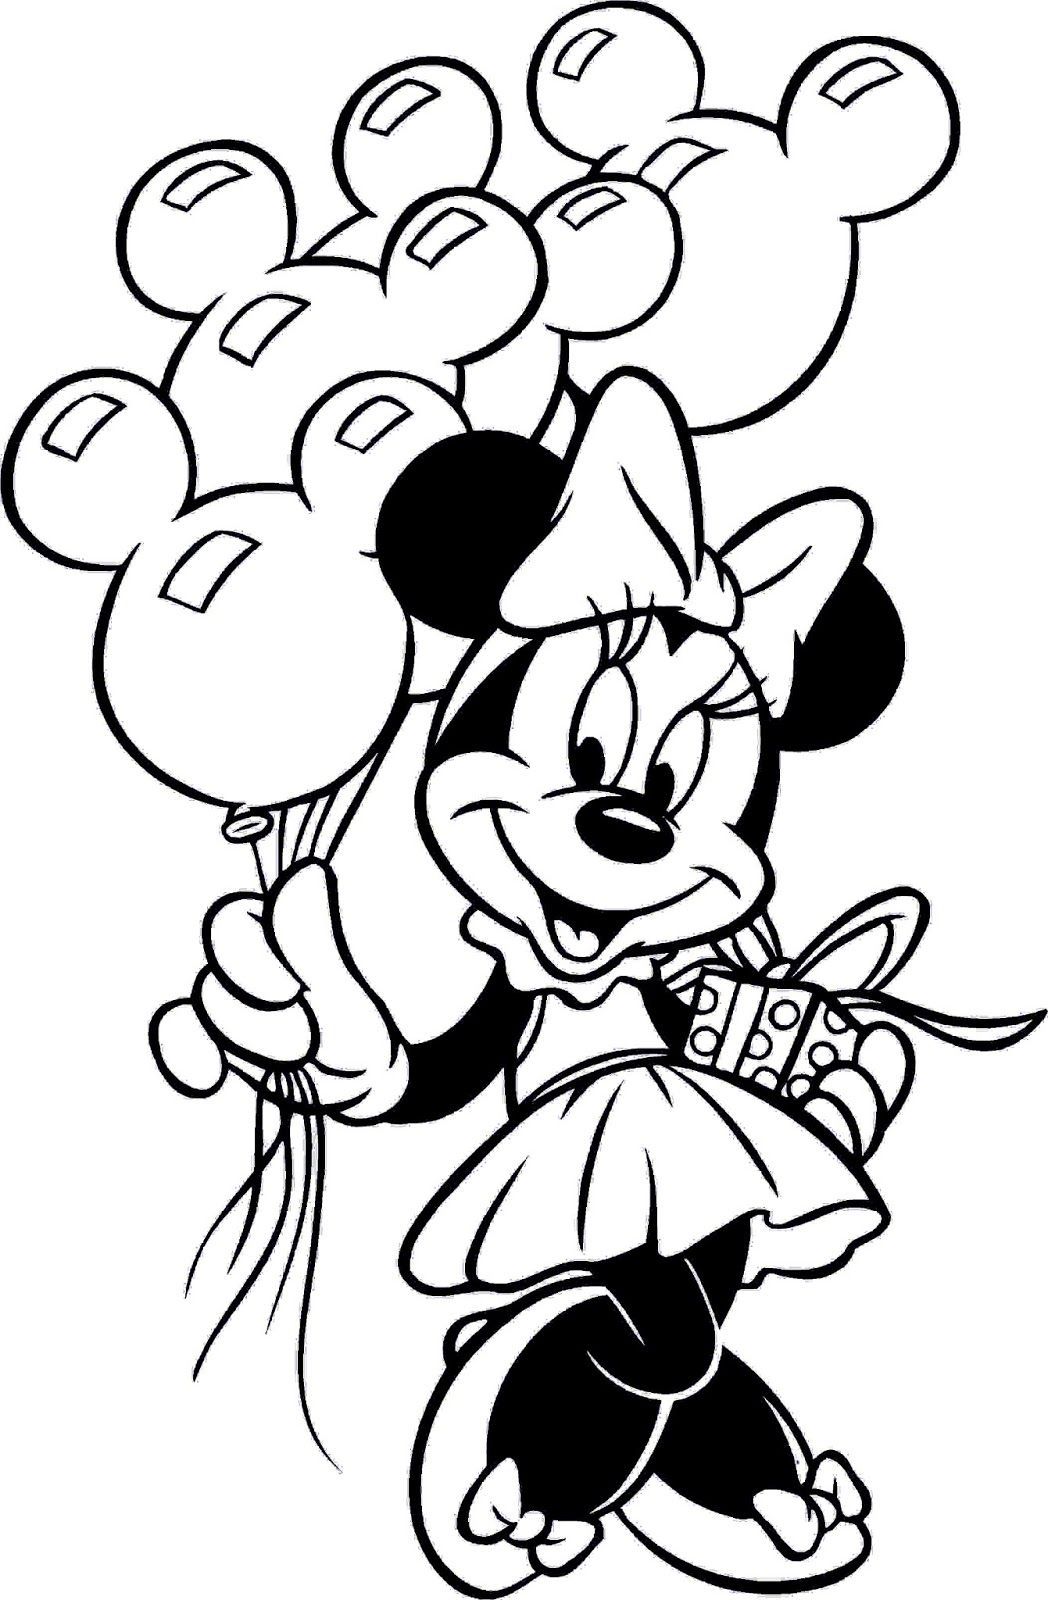 Minnie Mouse with balloons Coloring Pages Minnie Mouse Coloring Pages